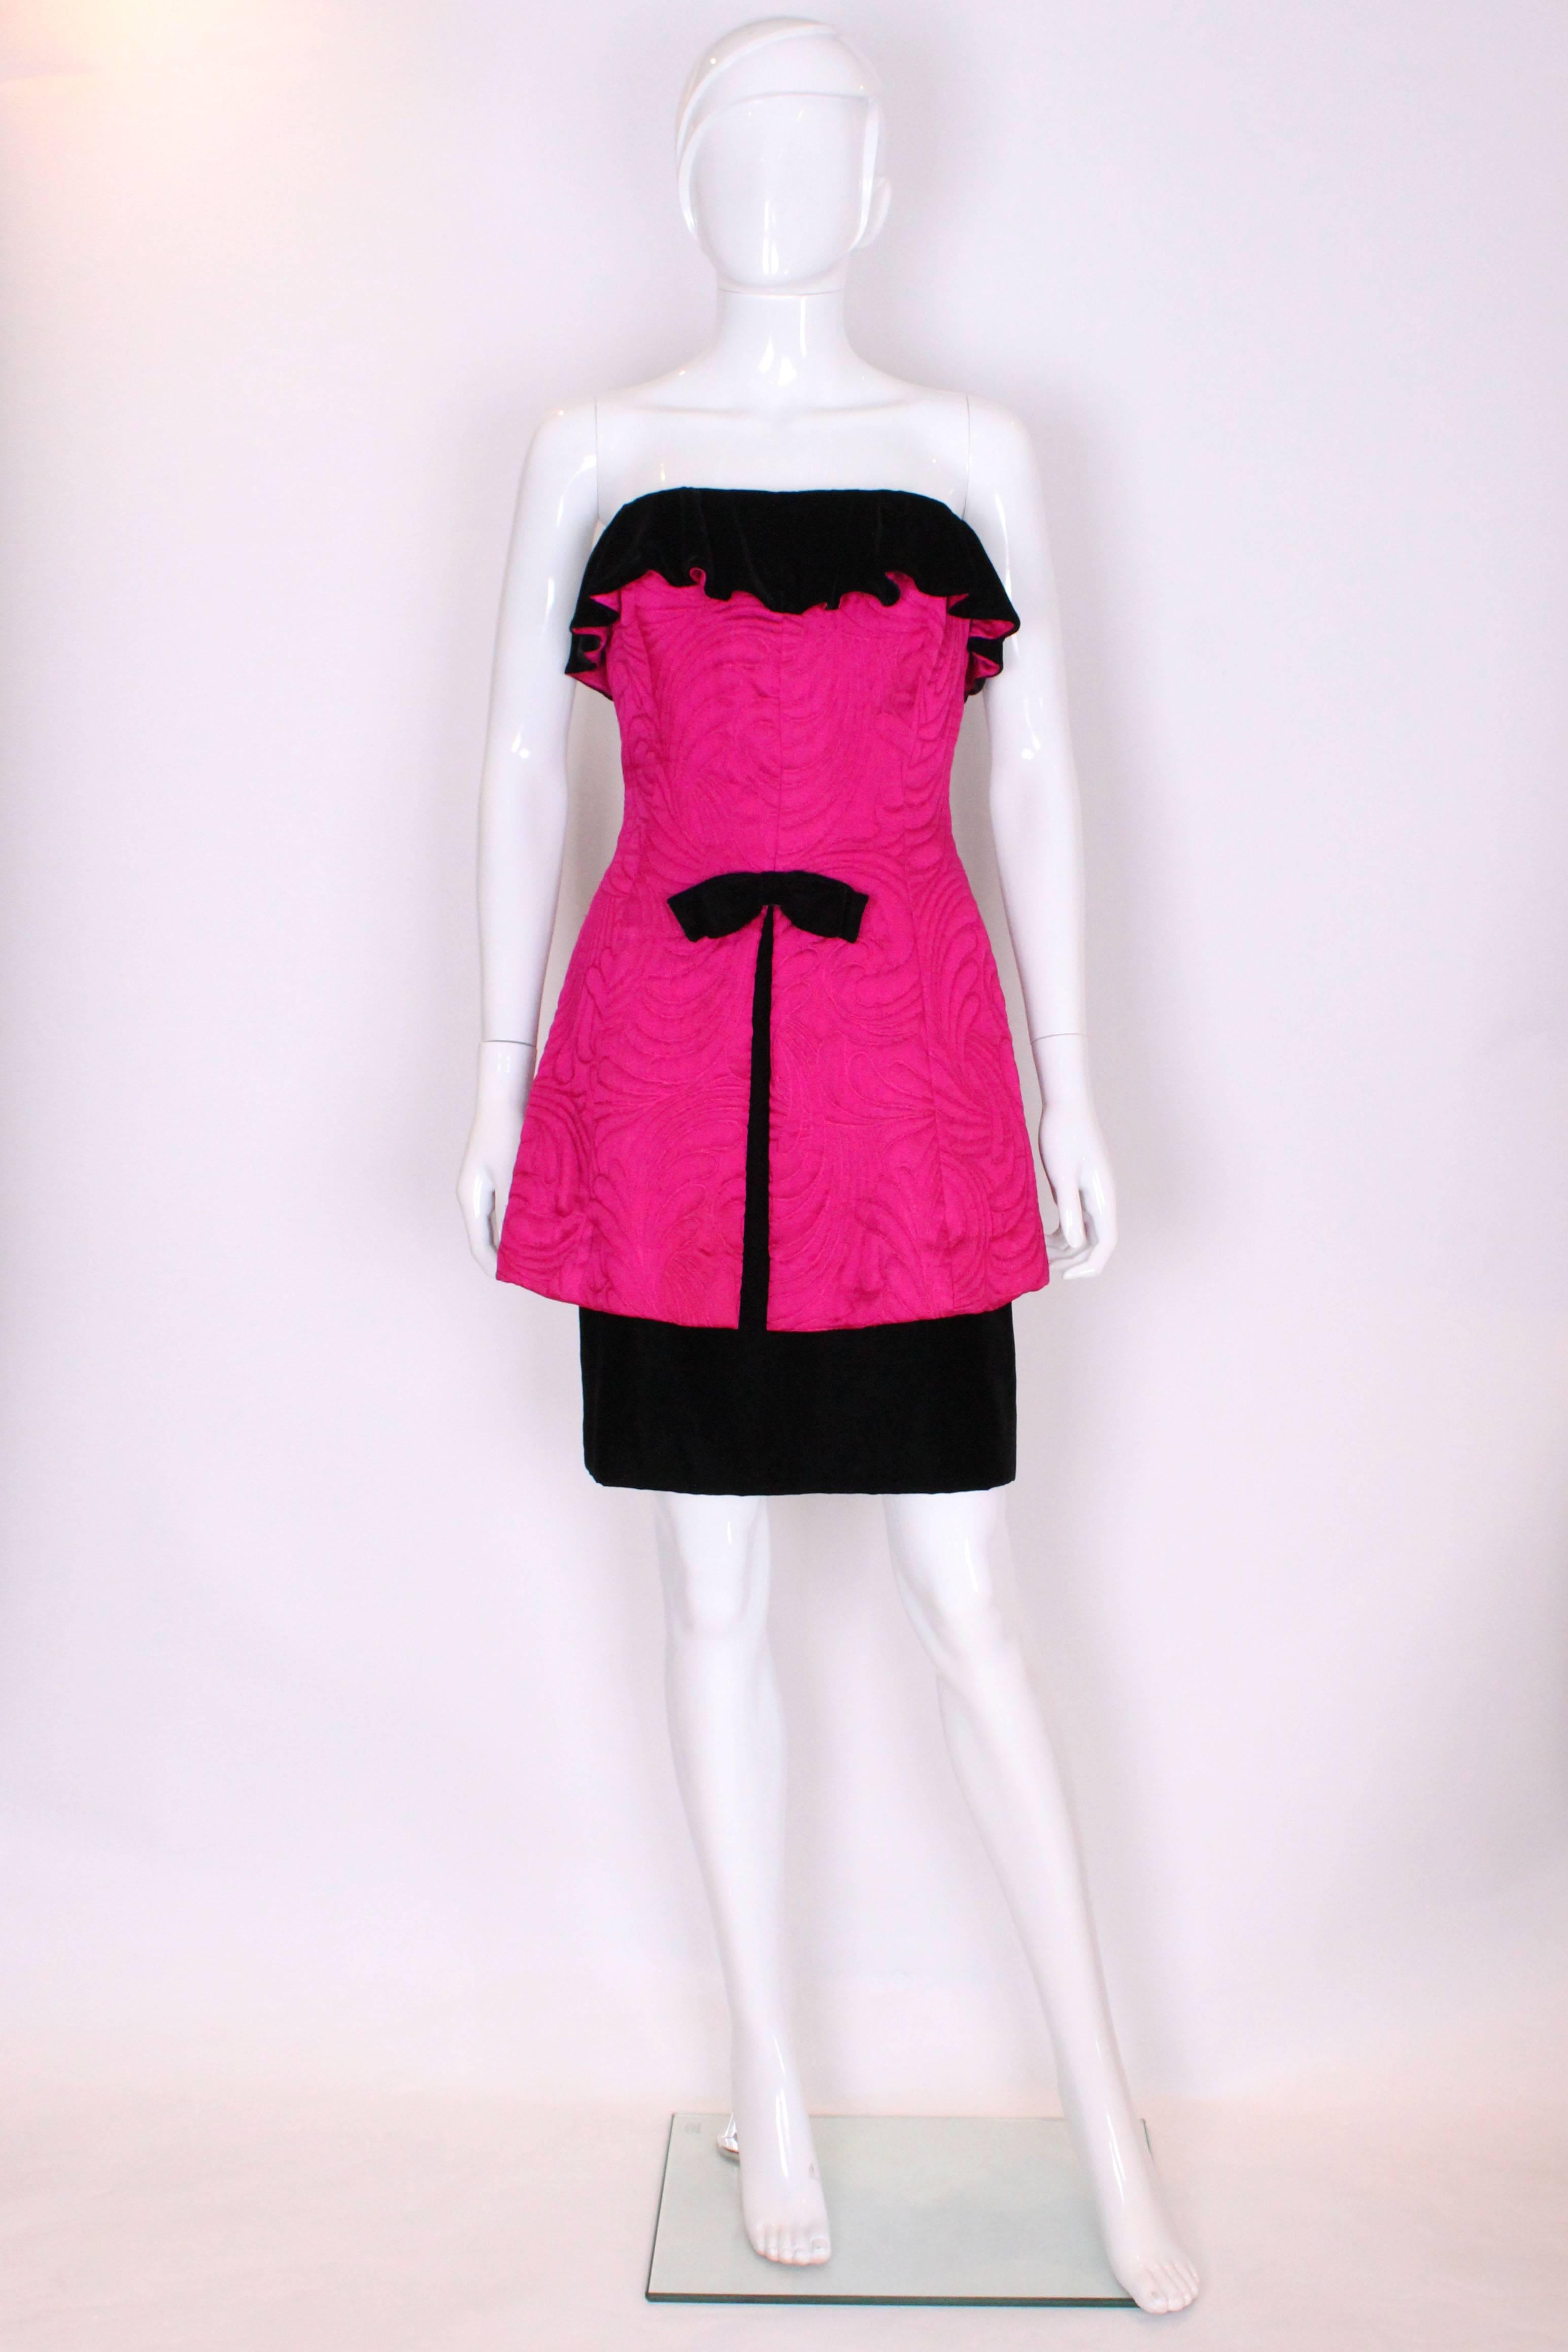 A real head turner for the party season. This dress is a wonderful shade of shocking pink , in a quilted fabric on the outer layer , with a black velvet under skirt, fold over top and bow.